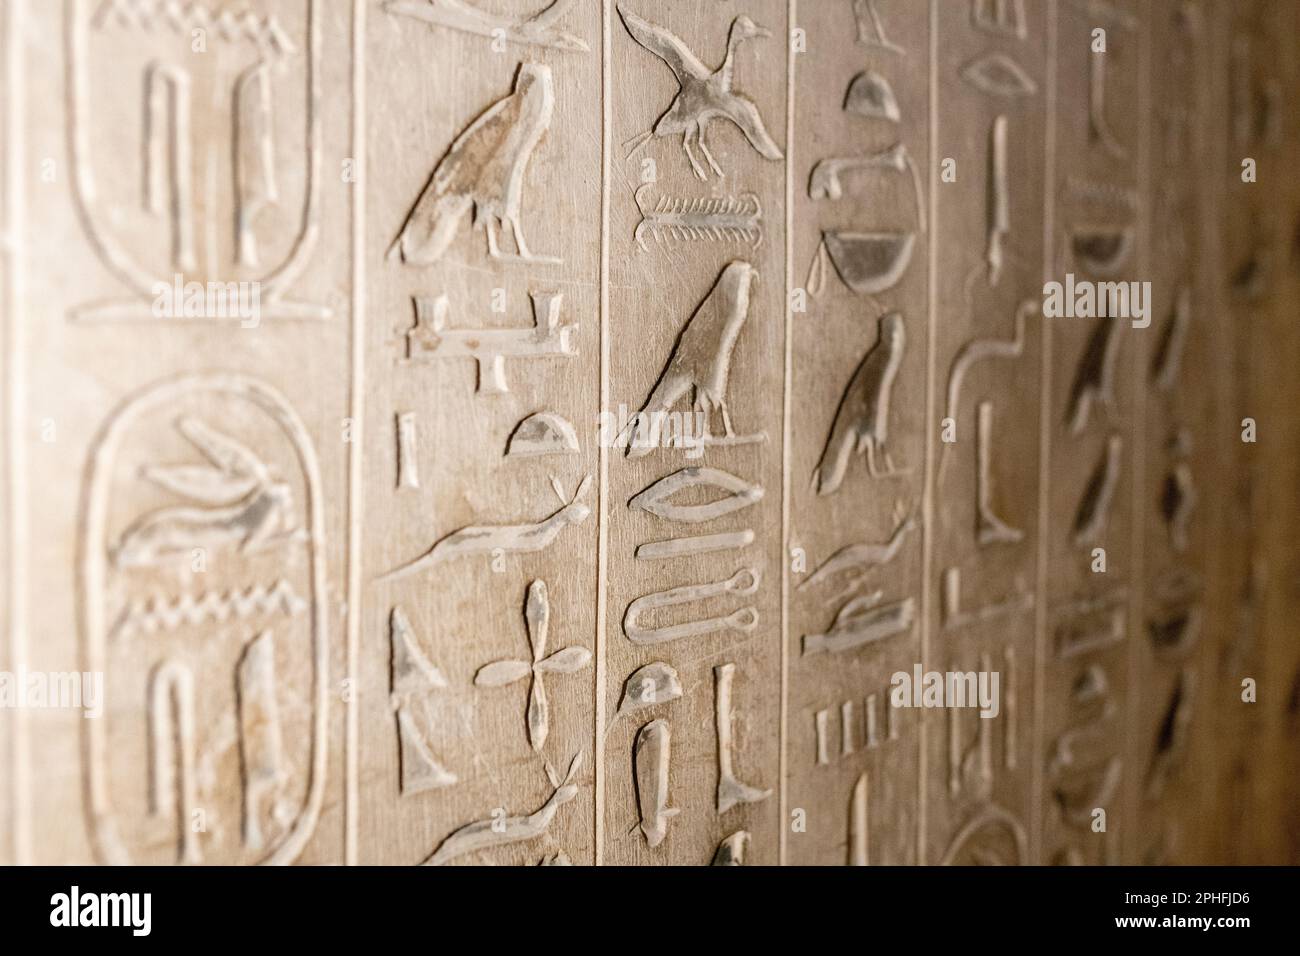 Authentic hieroglyphic inscriptions inside an underground burial chamber in the Pyramid of Unas at the Saqqara Necropolis in Giza, Egypt Stock Photo